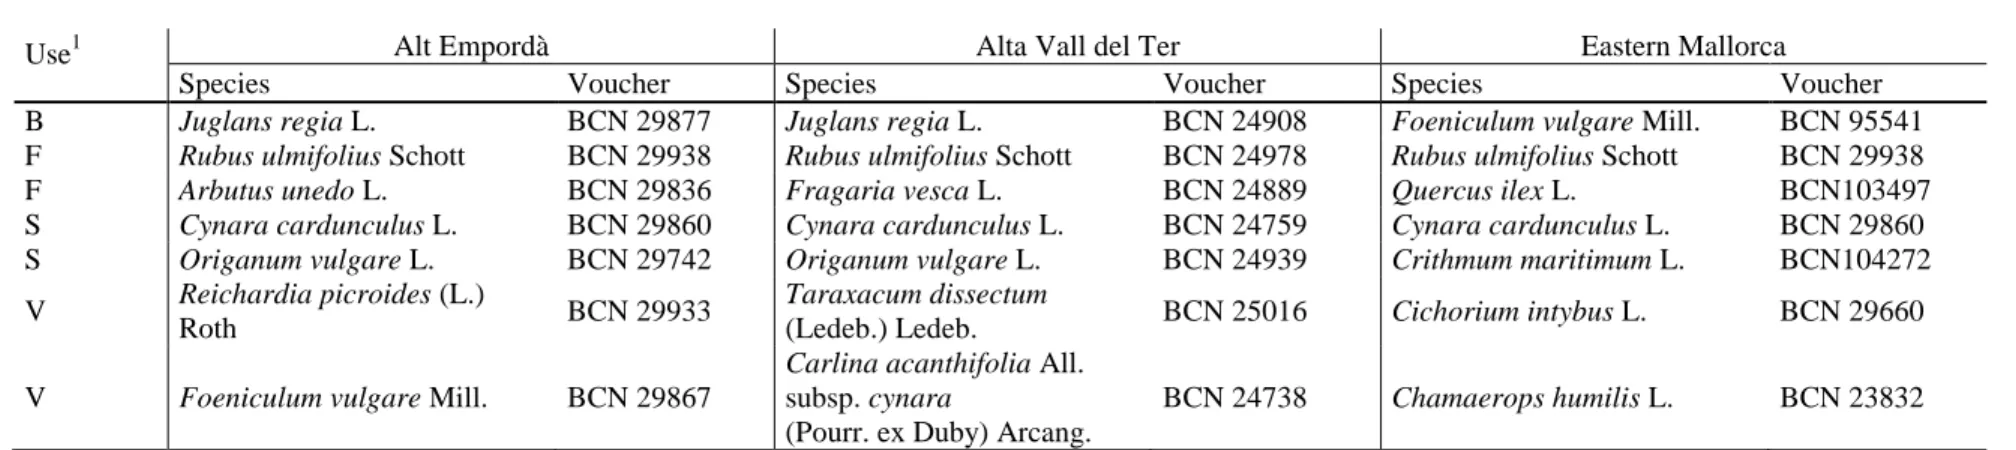 Table 2   Species included in the survey, per study site 